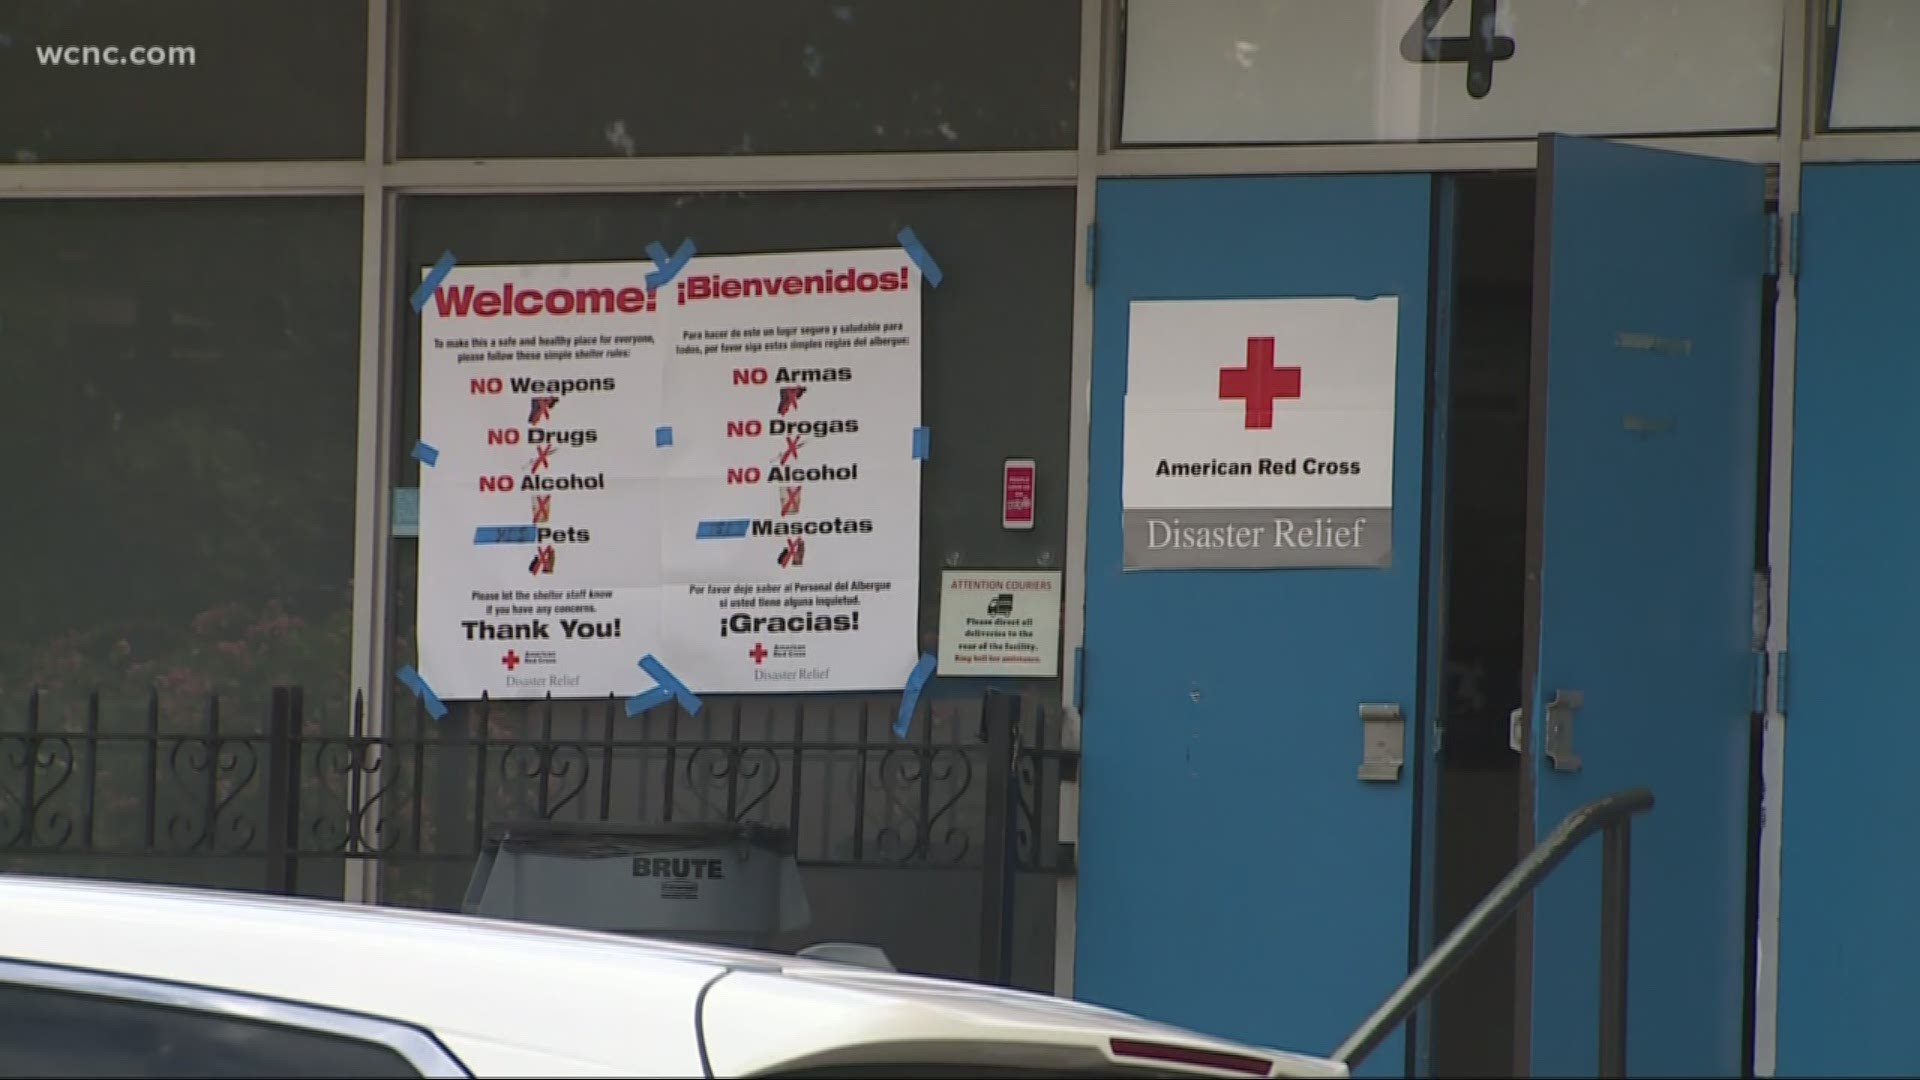 Monroe Middle School Red Cross Shelter in Union County found alternative locations for two sex offenders with the government covering the expense. Red Cross wanted to make sure shelter residents felt safe.